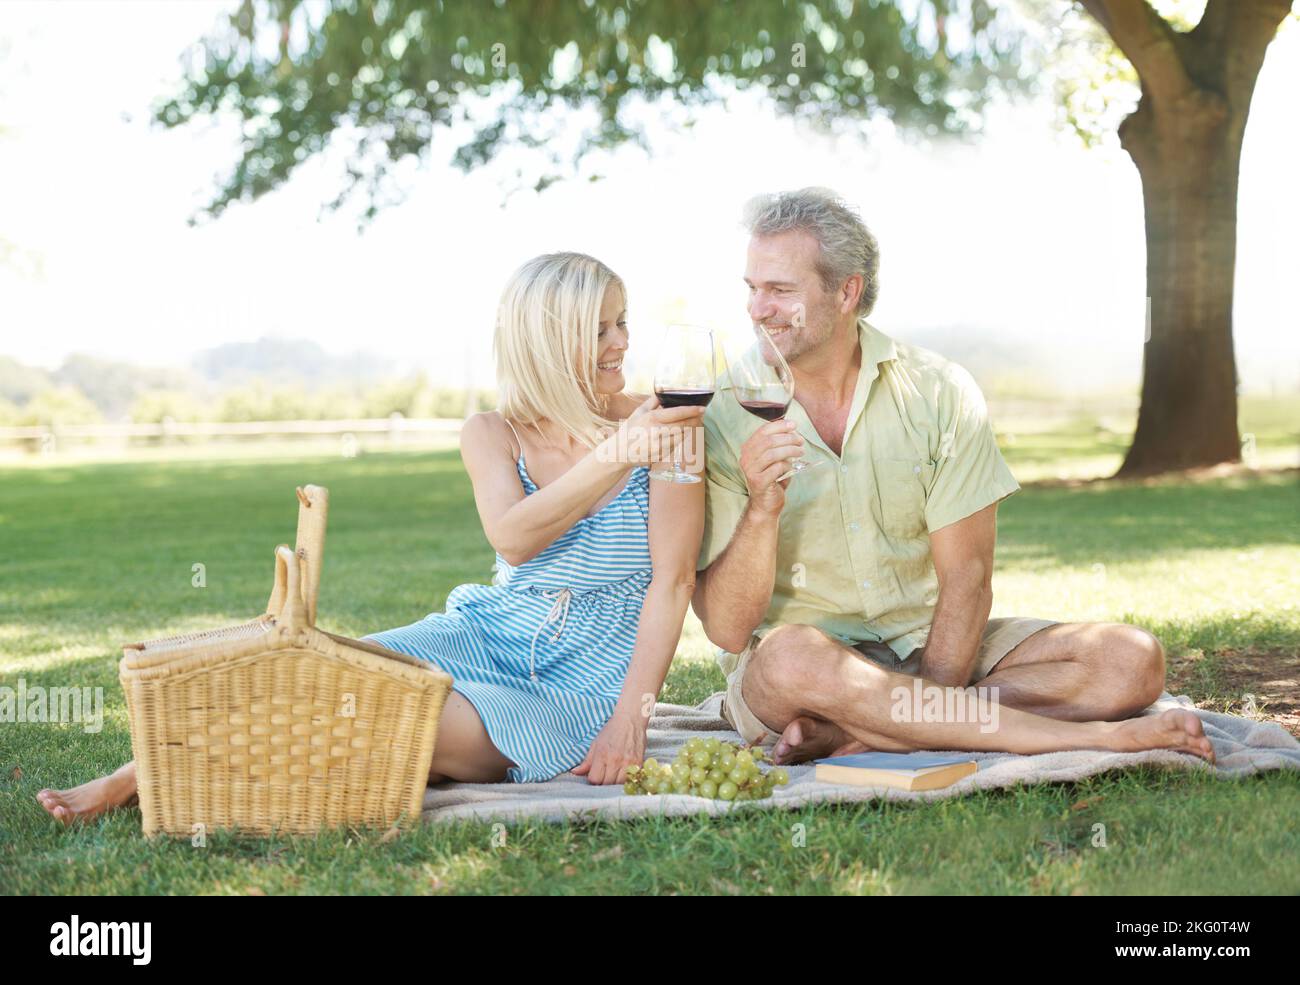 Lovely Day For A Picnic Stock Photo - Download Image Now - Adult, Adults  Only, Basket - iStock